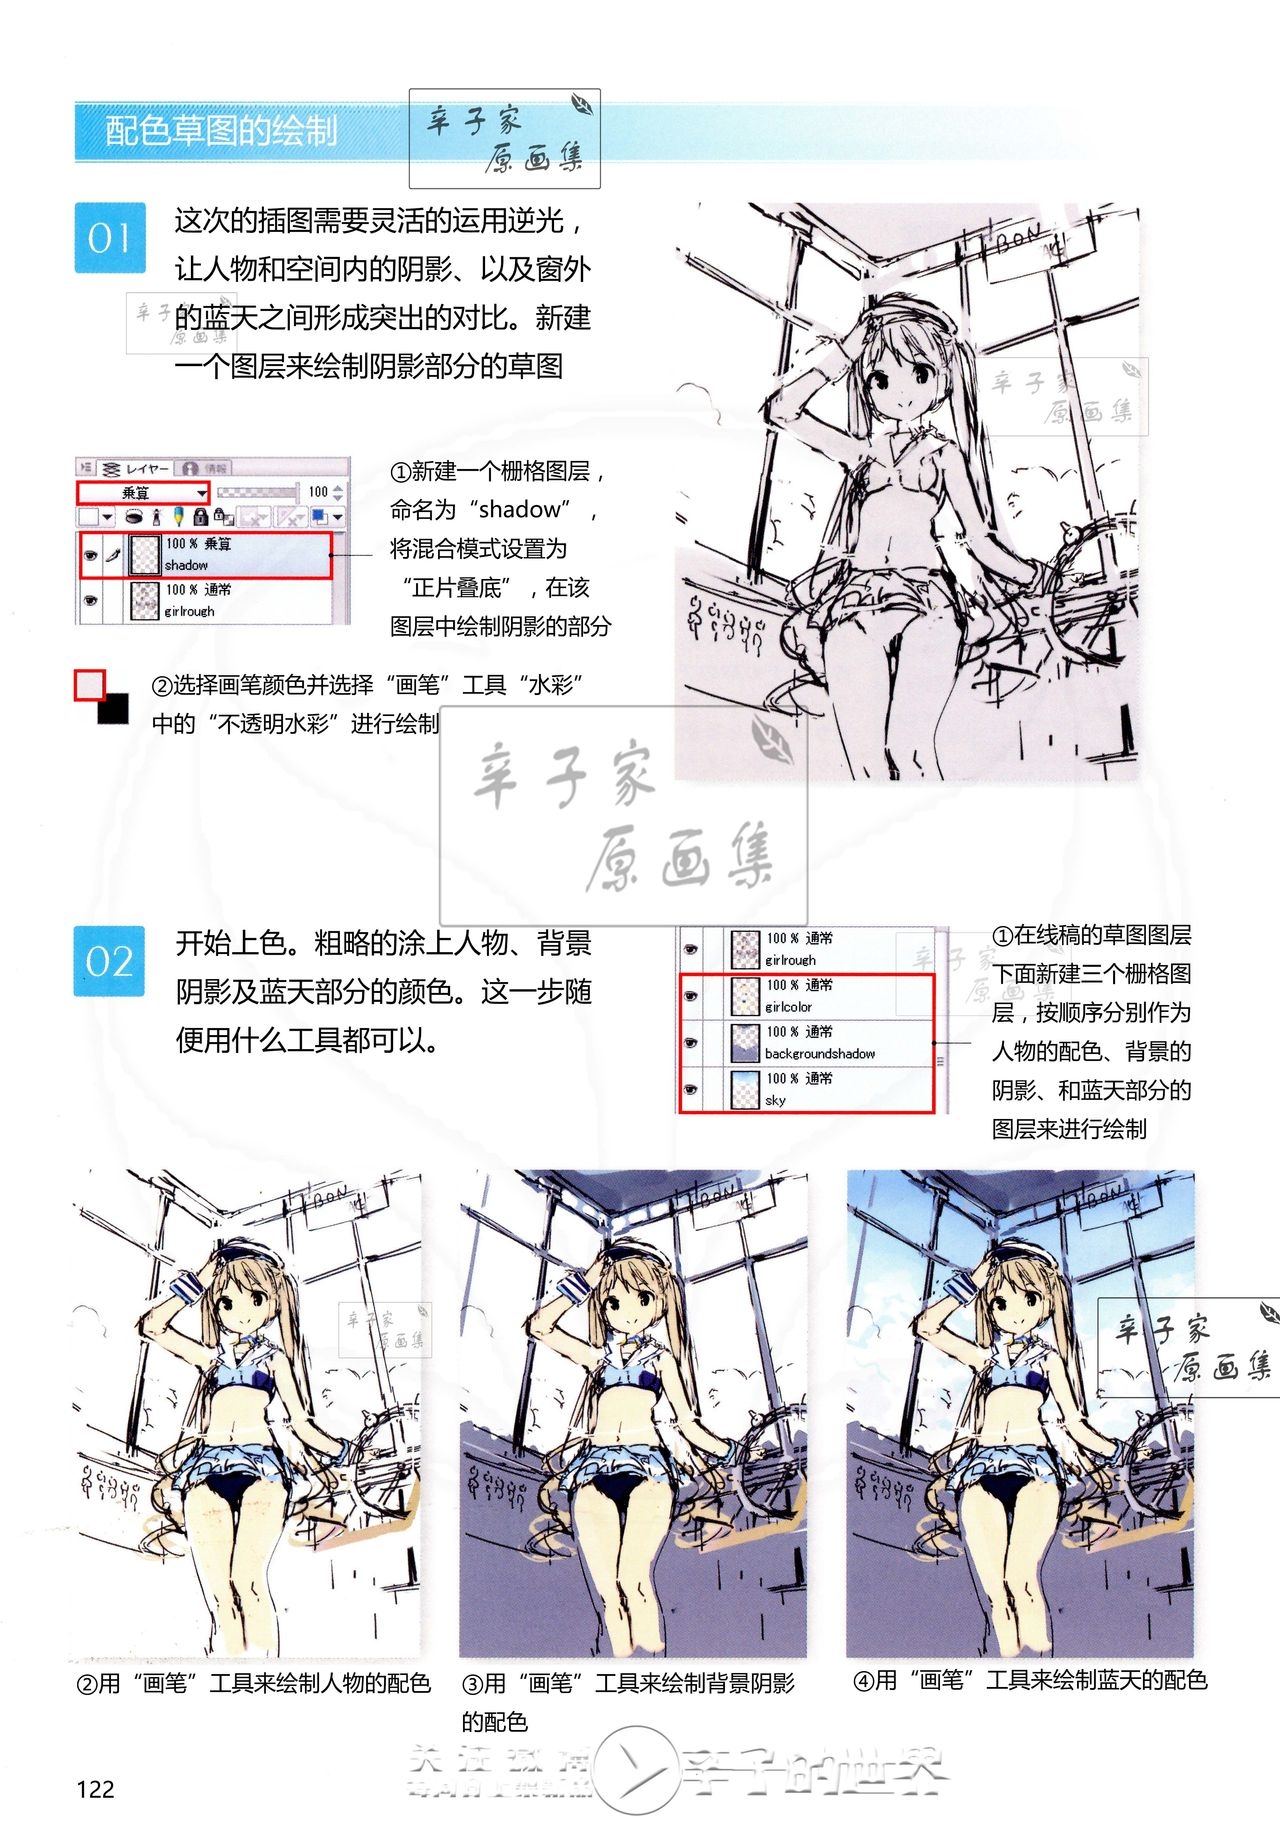 [Anmi] Lets Make ★ Character CG illustration techniques vol.9 [Chinese] 120